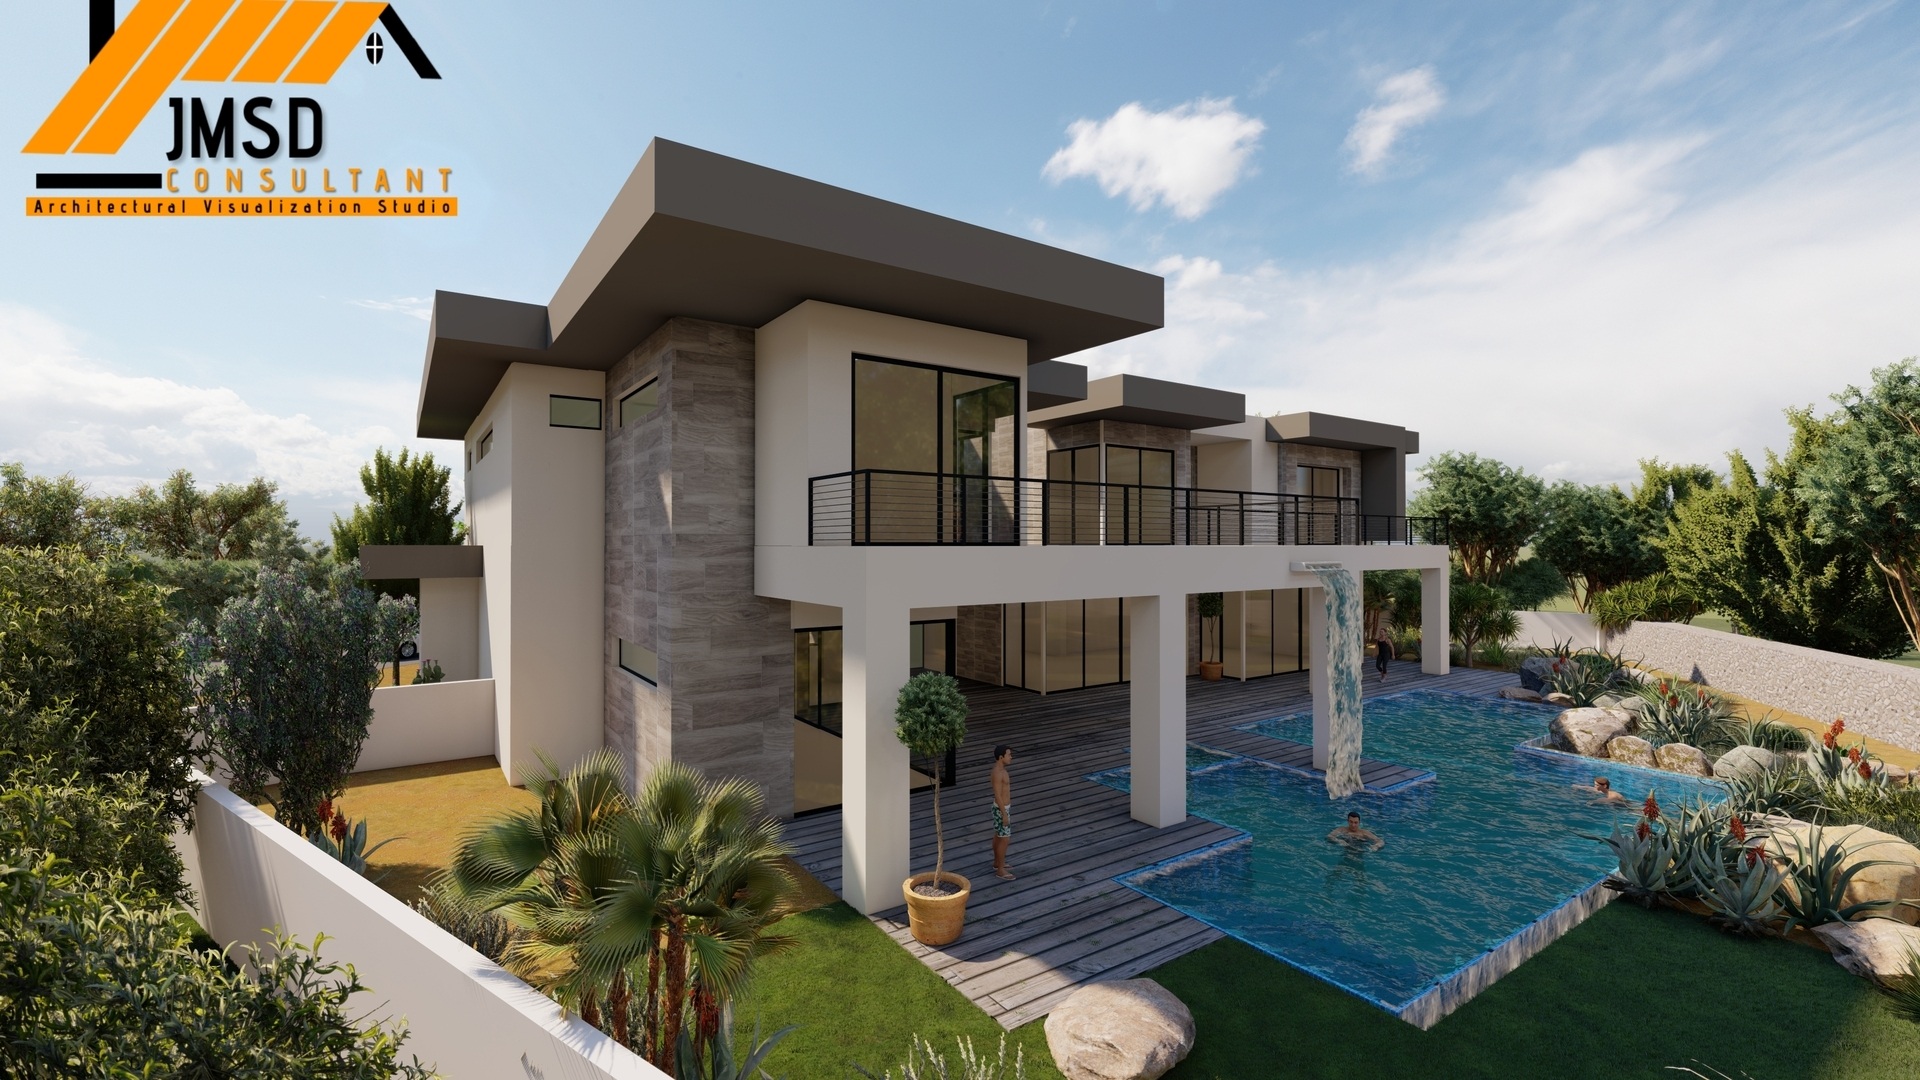 Architectural 3D Rendering Services is an...